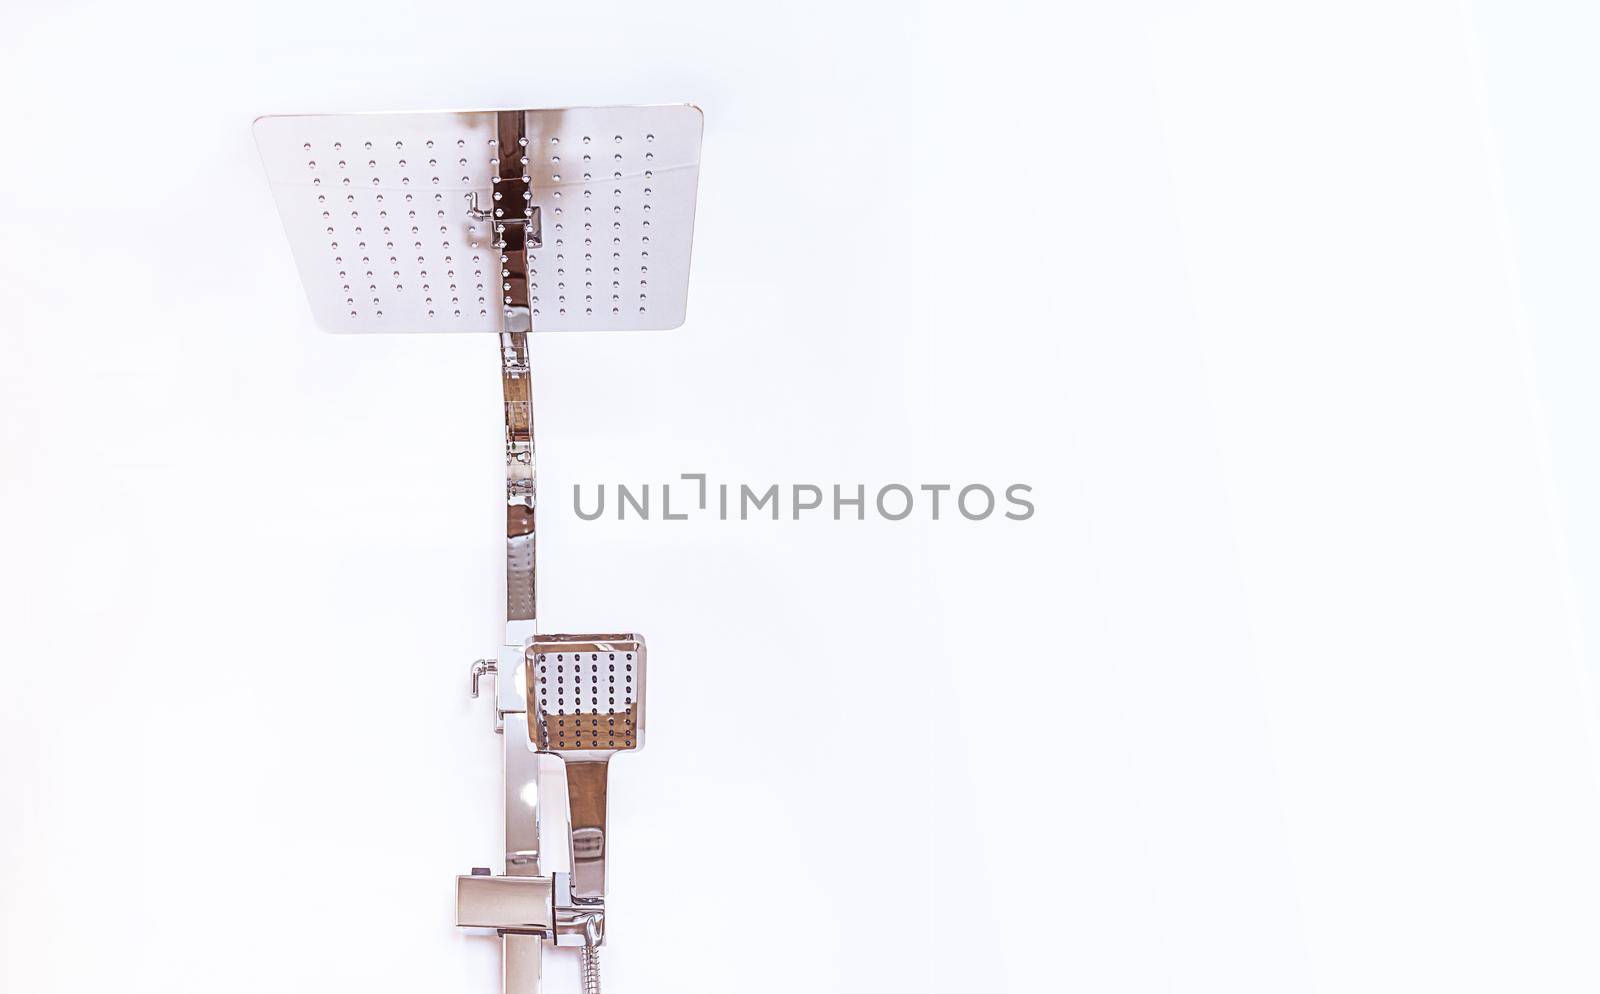 chrome rain shower closeup, isolated object hanging on the wall, copy paste by Ramanouskaya